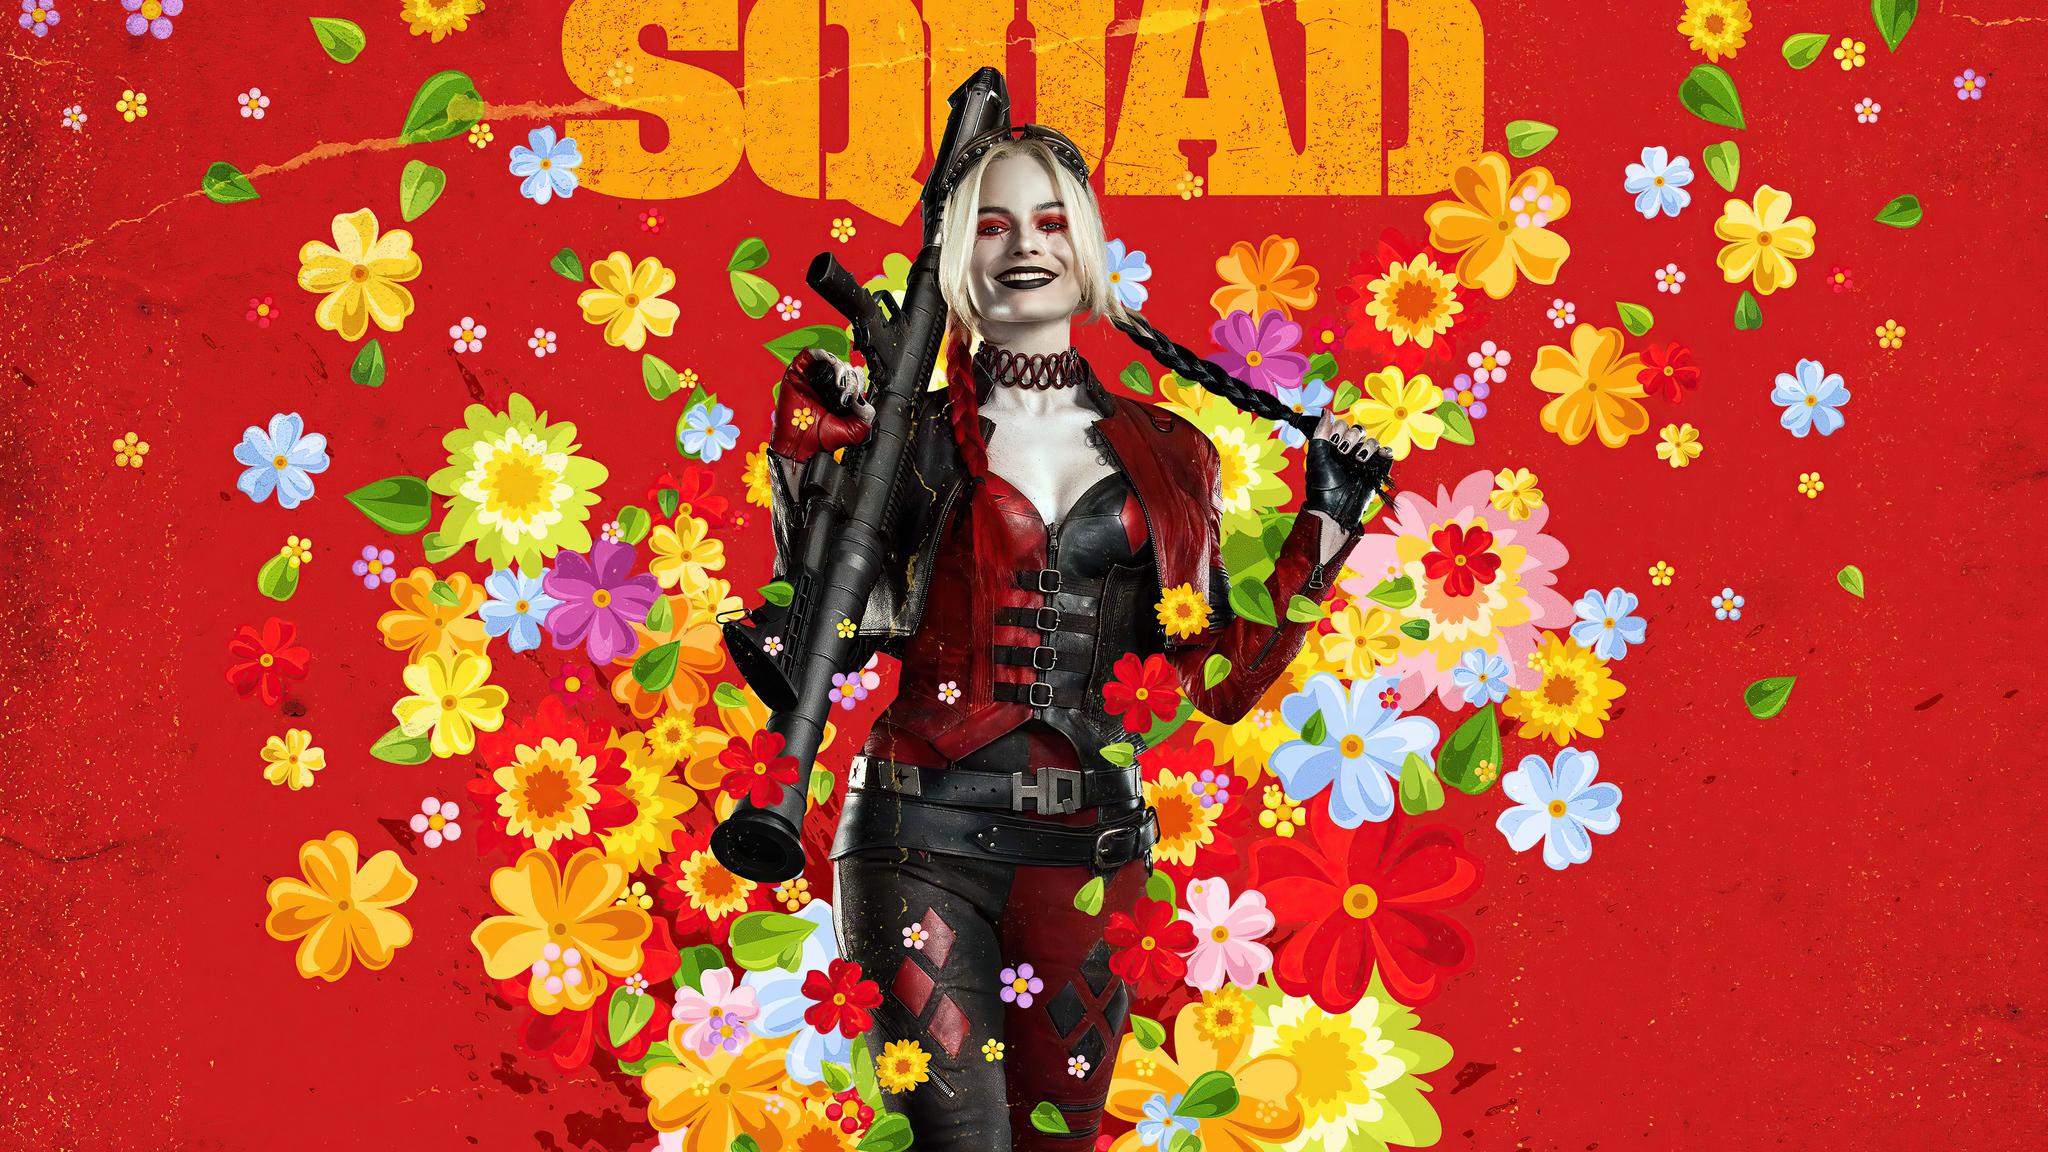 harley-quinn-the-suicide-squad-yv.jpg